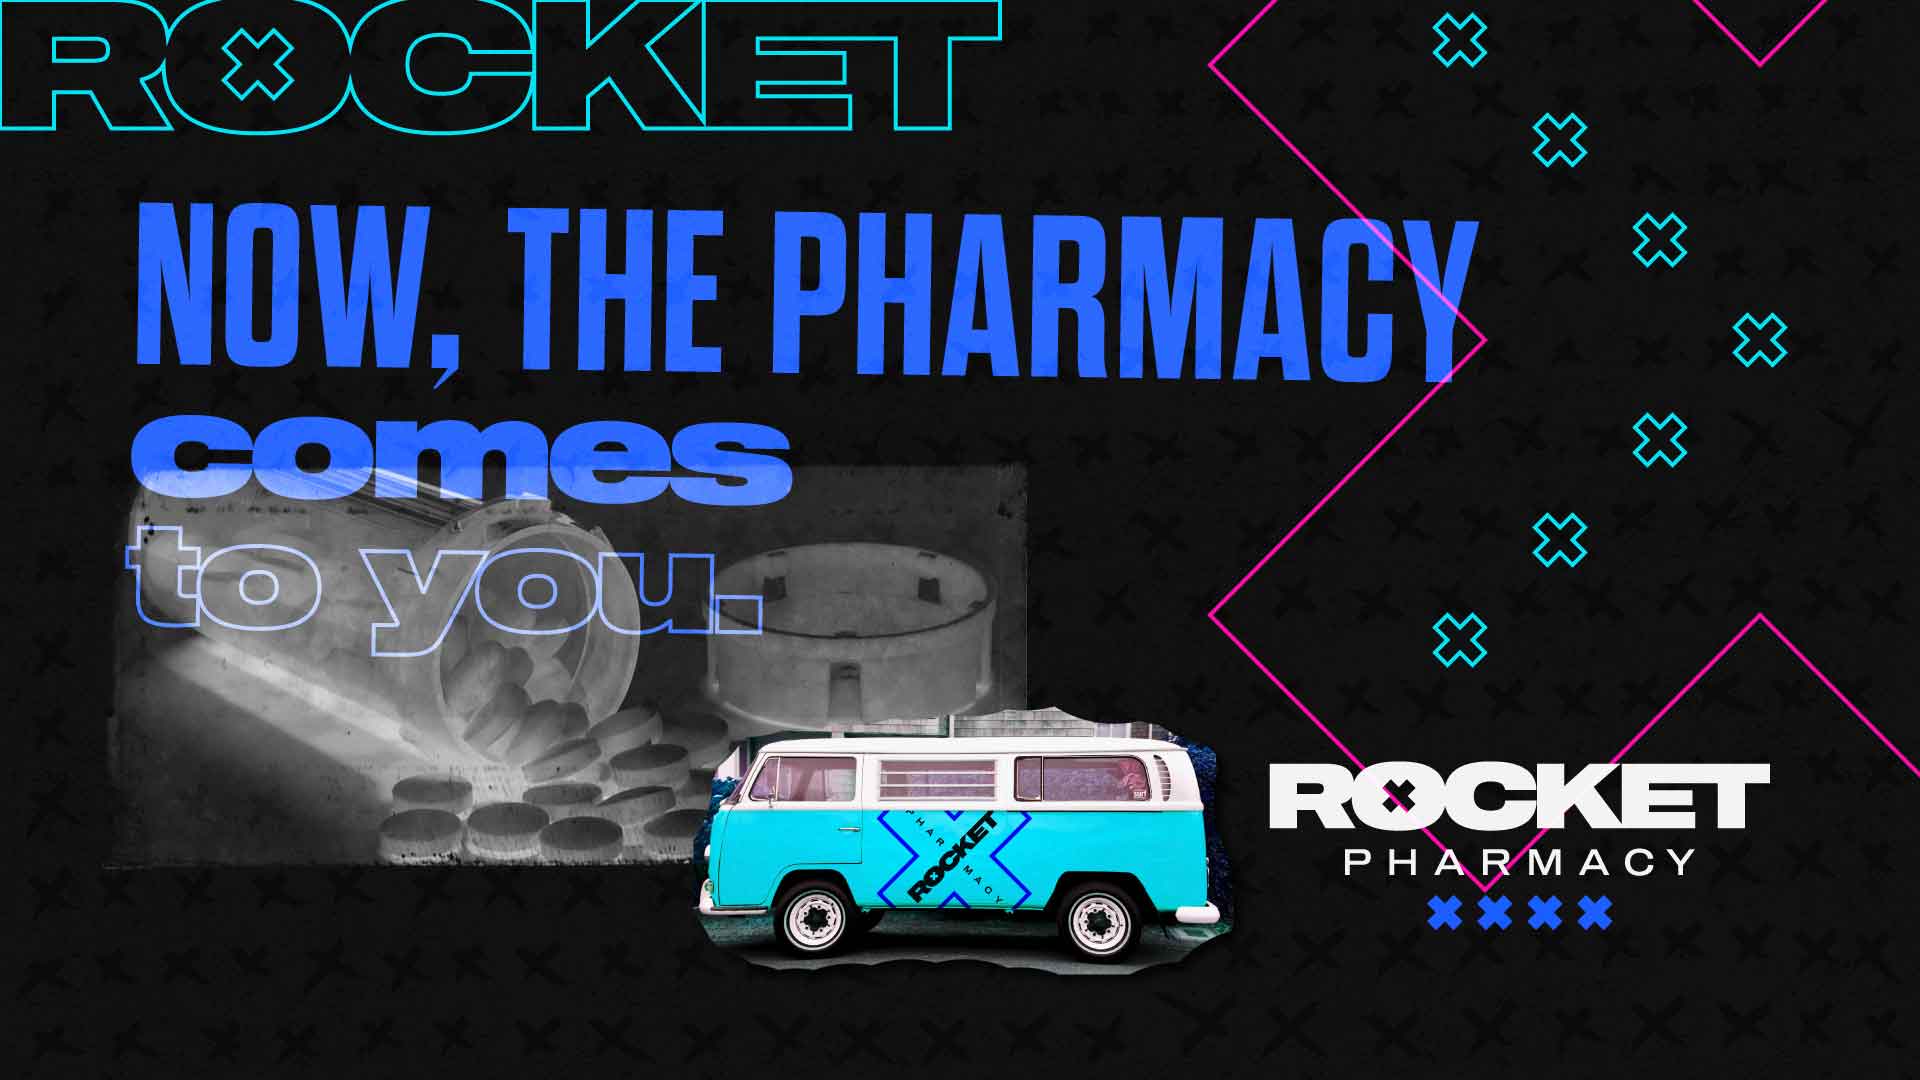 Rocket Pharmacy brand design key graphic which reads "Now, the pharmacy comes to you."